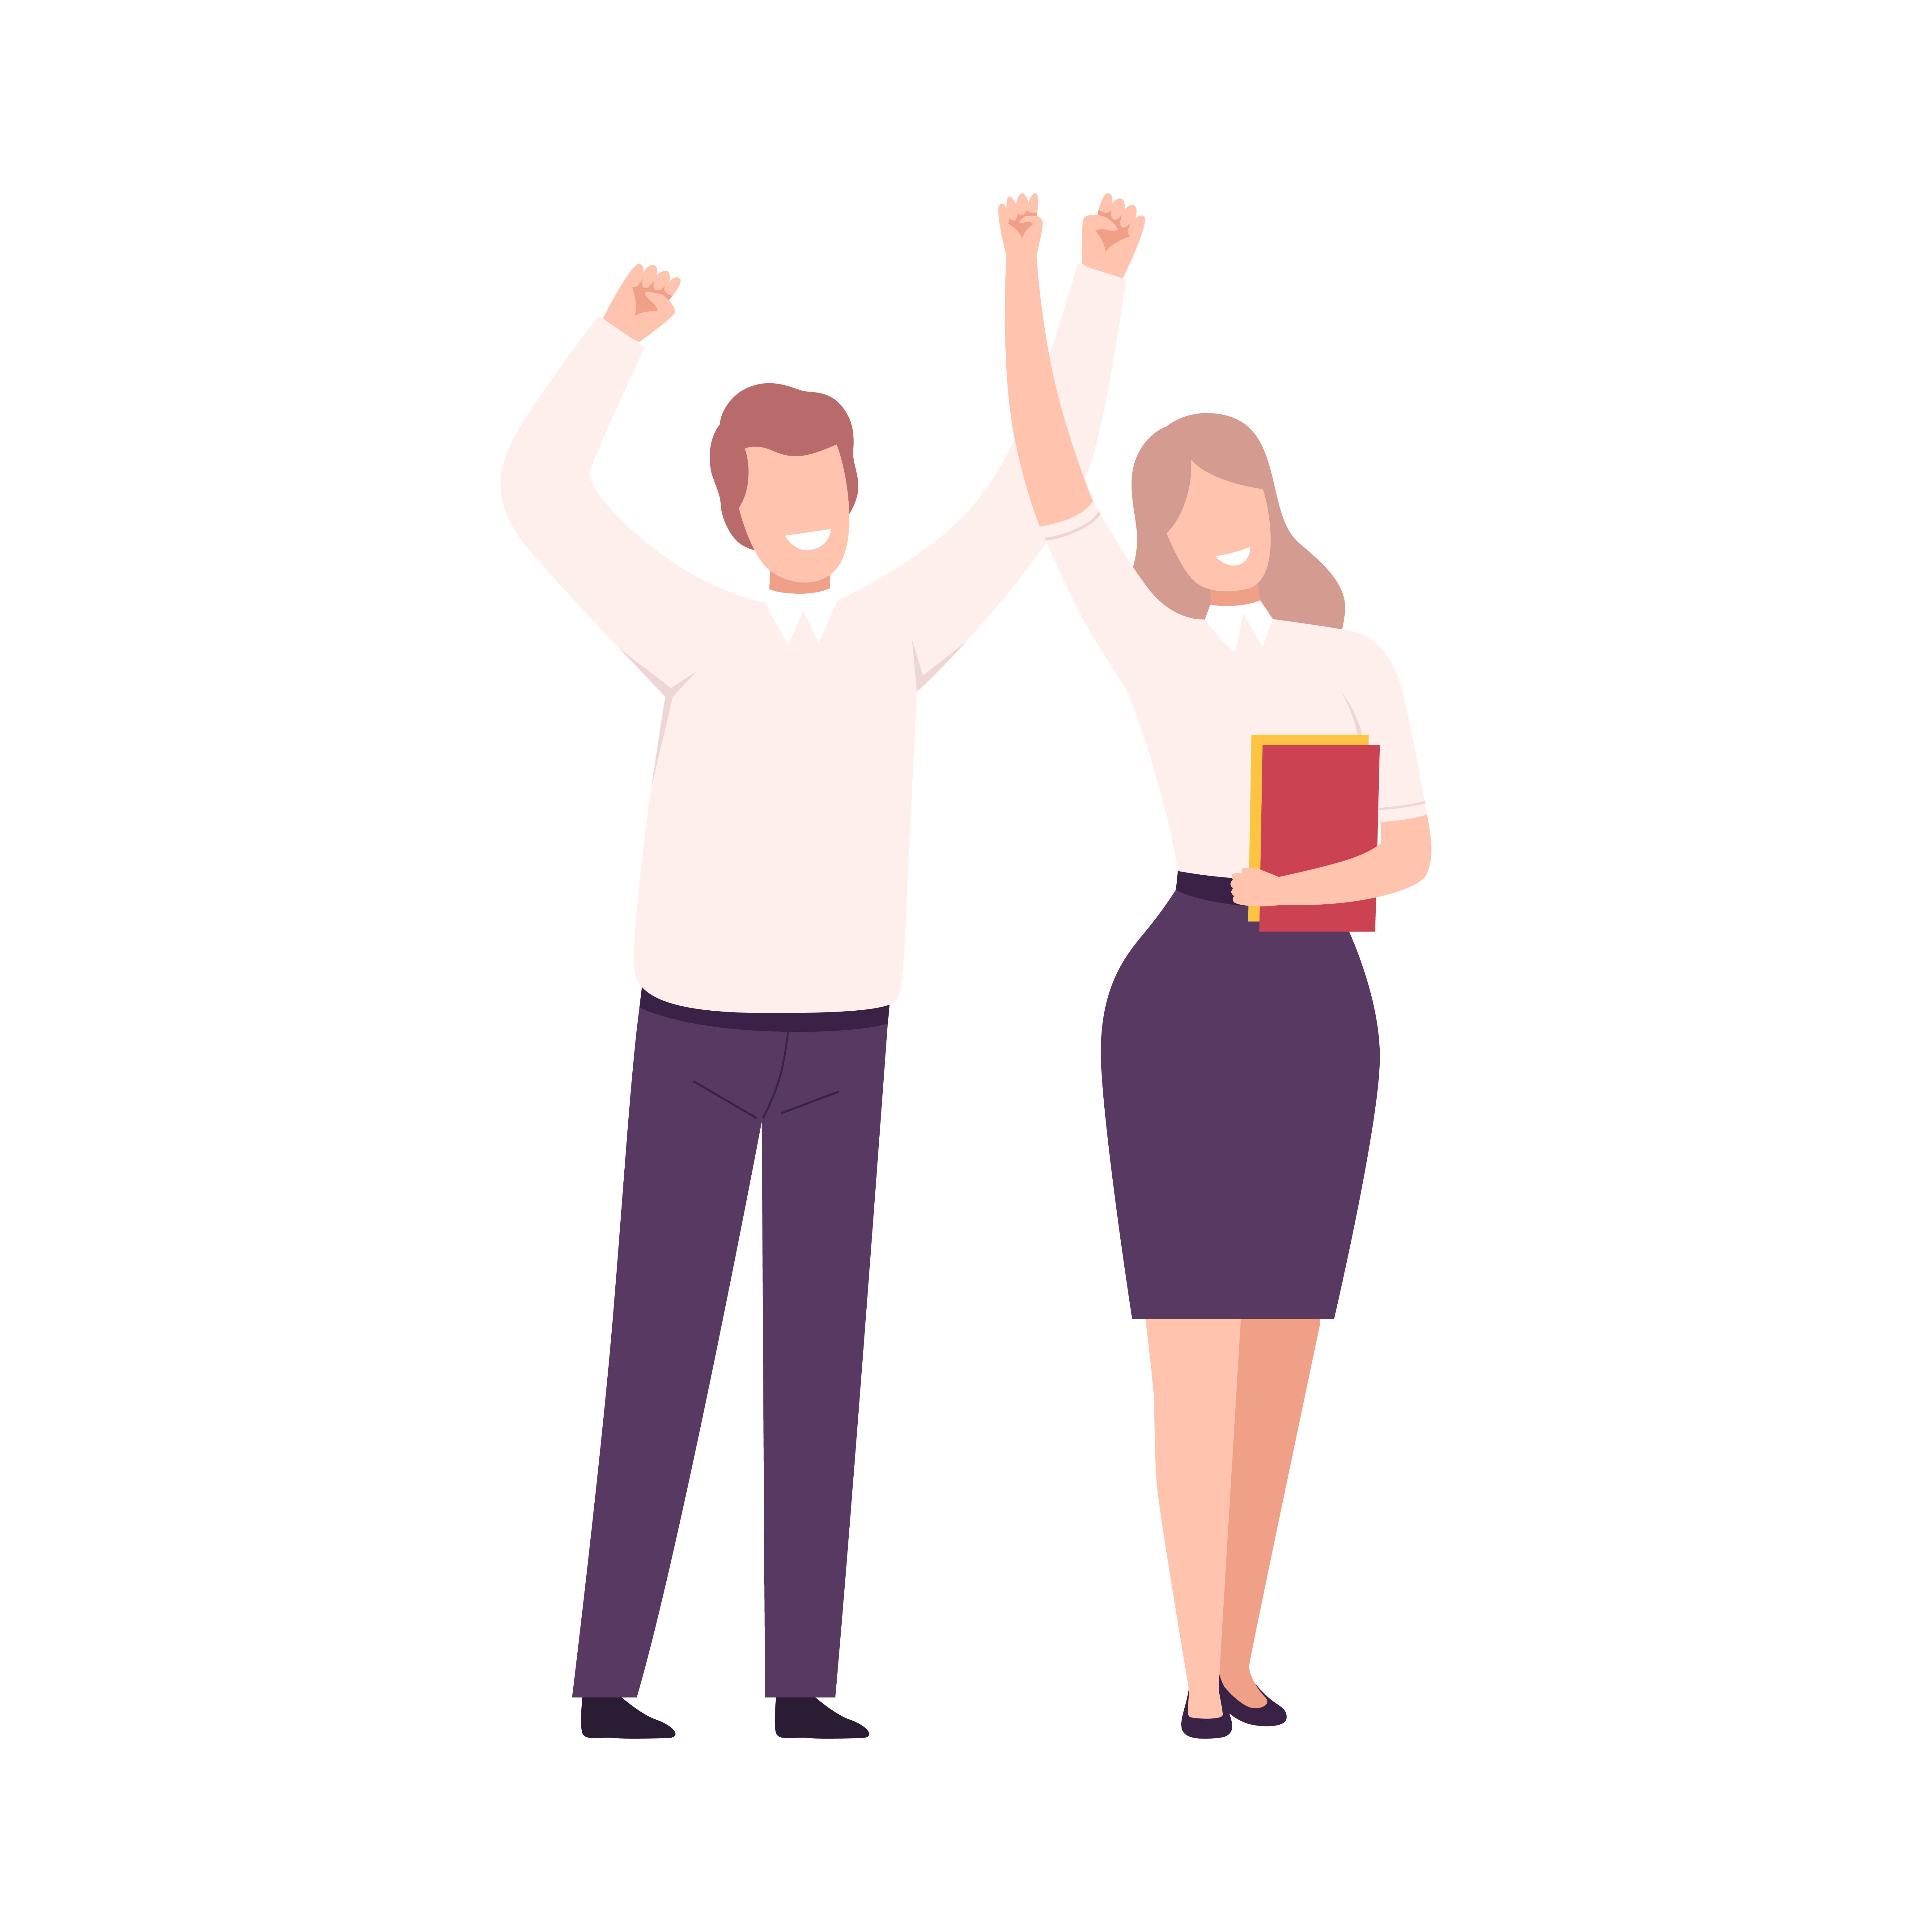 Business People Celebrating Victory, Successful Managers Characters Dressed in Business Clothes Standing with Their Hands Up Flat Vector Illustration on White Background.